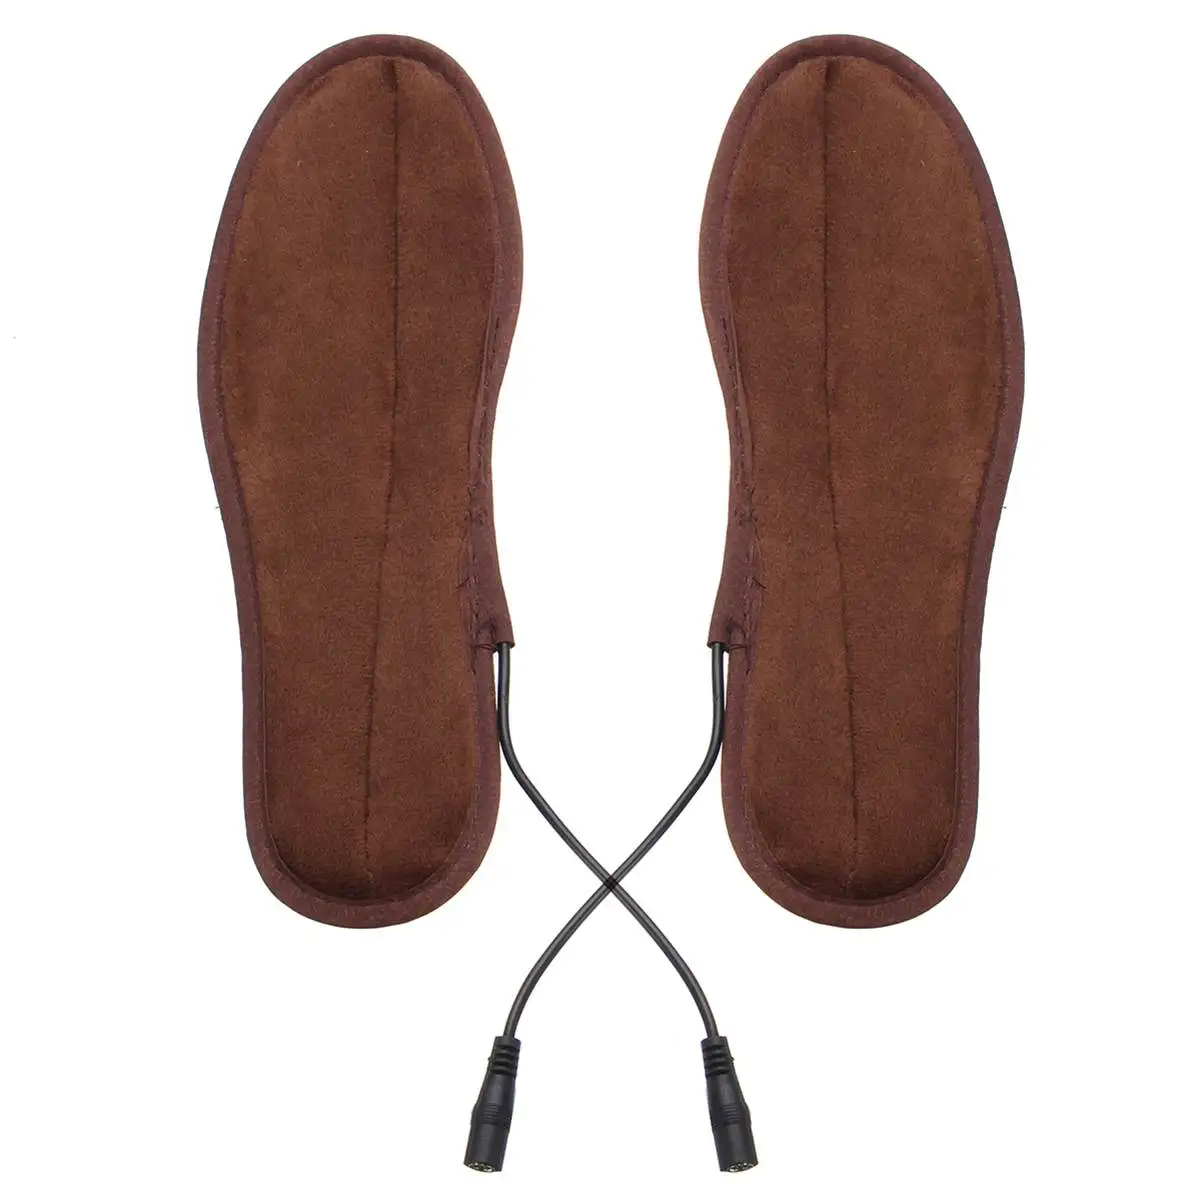 Unisex USB Charging Electric Heated Insoles for Shoes Winter Warmer Foot Heating Insole Boots Rechargeable Heater Pads Soles